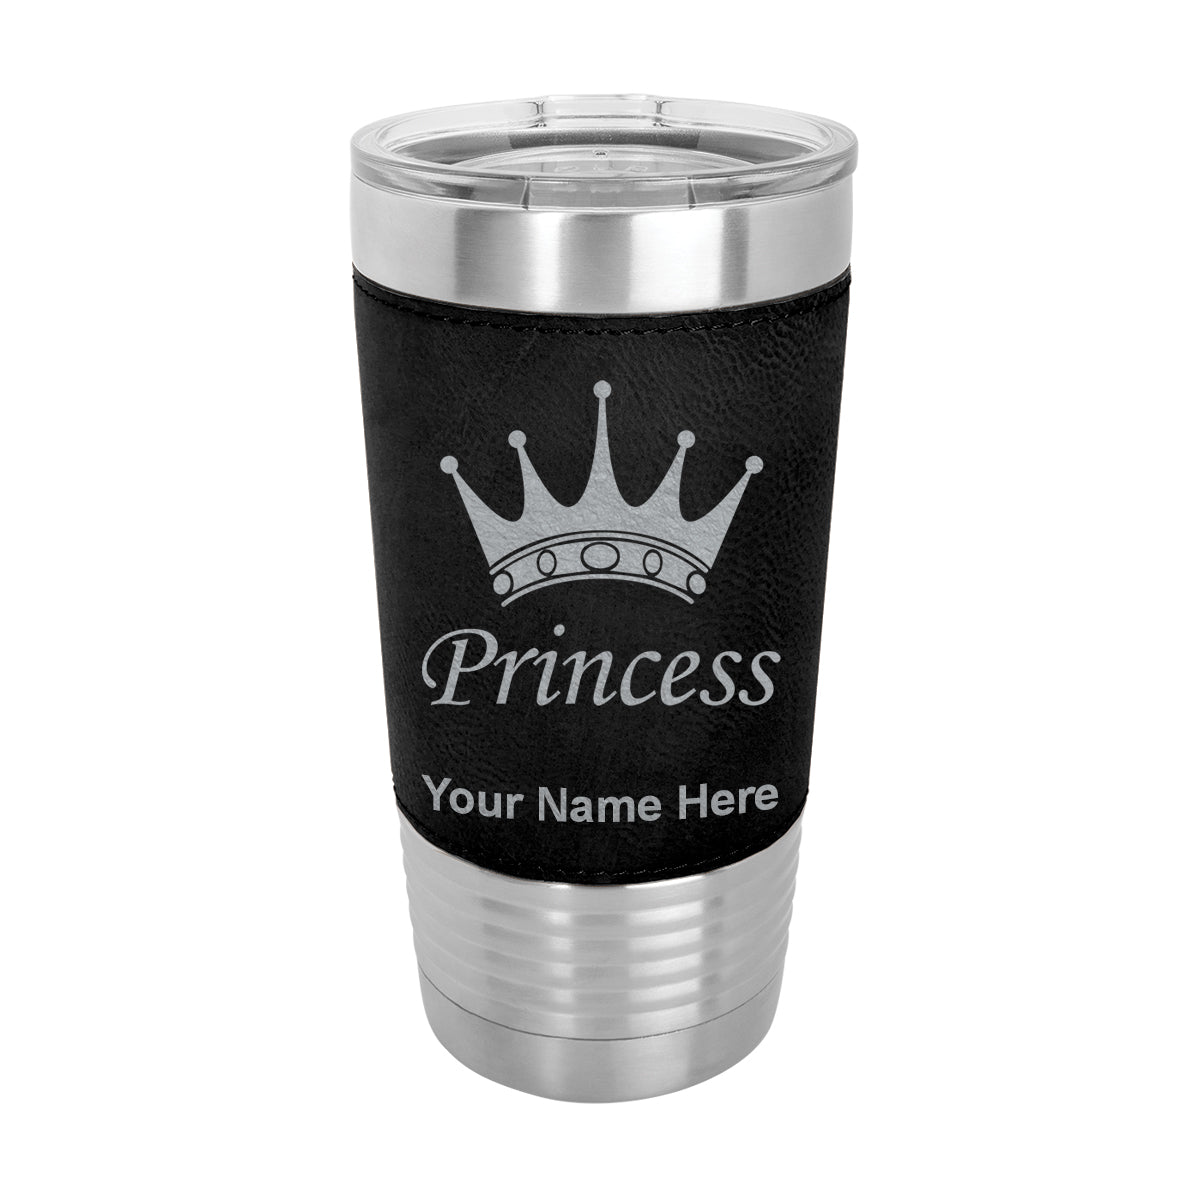 20oz Faux Leather Tumbler Mug, Princess Crown, Personalized Engraving Included - LaserGram Custom Engraved Gifts